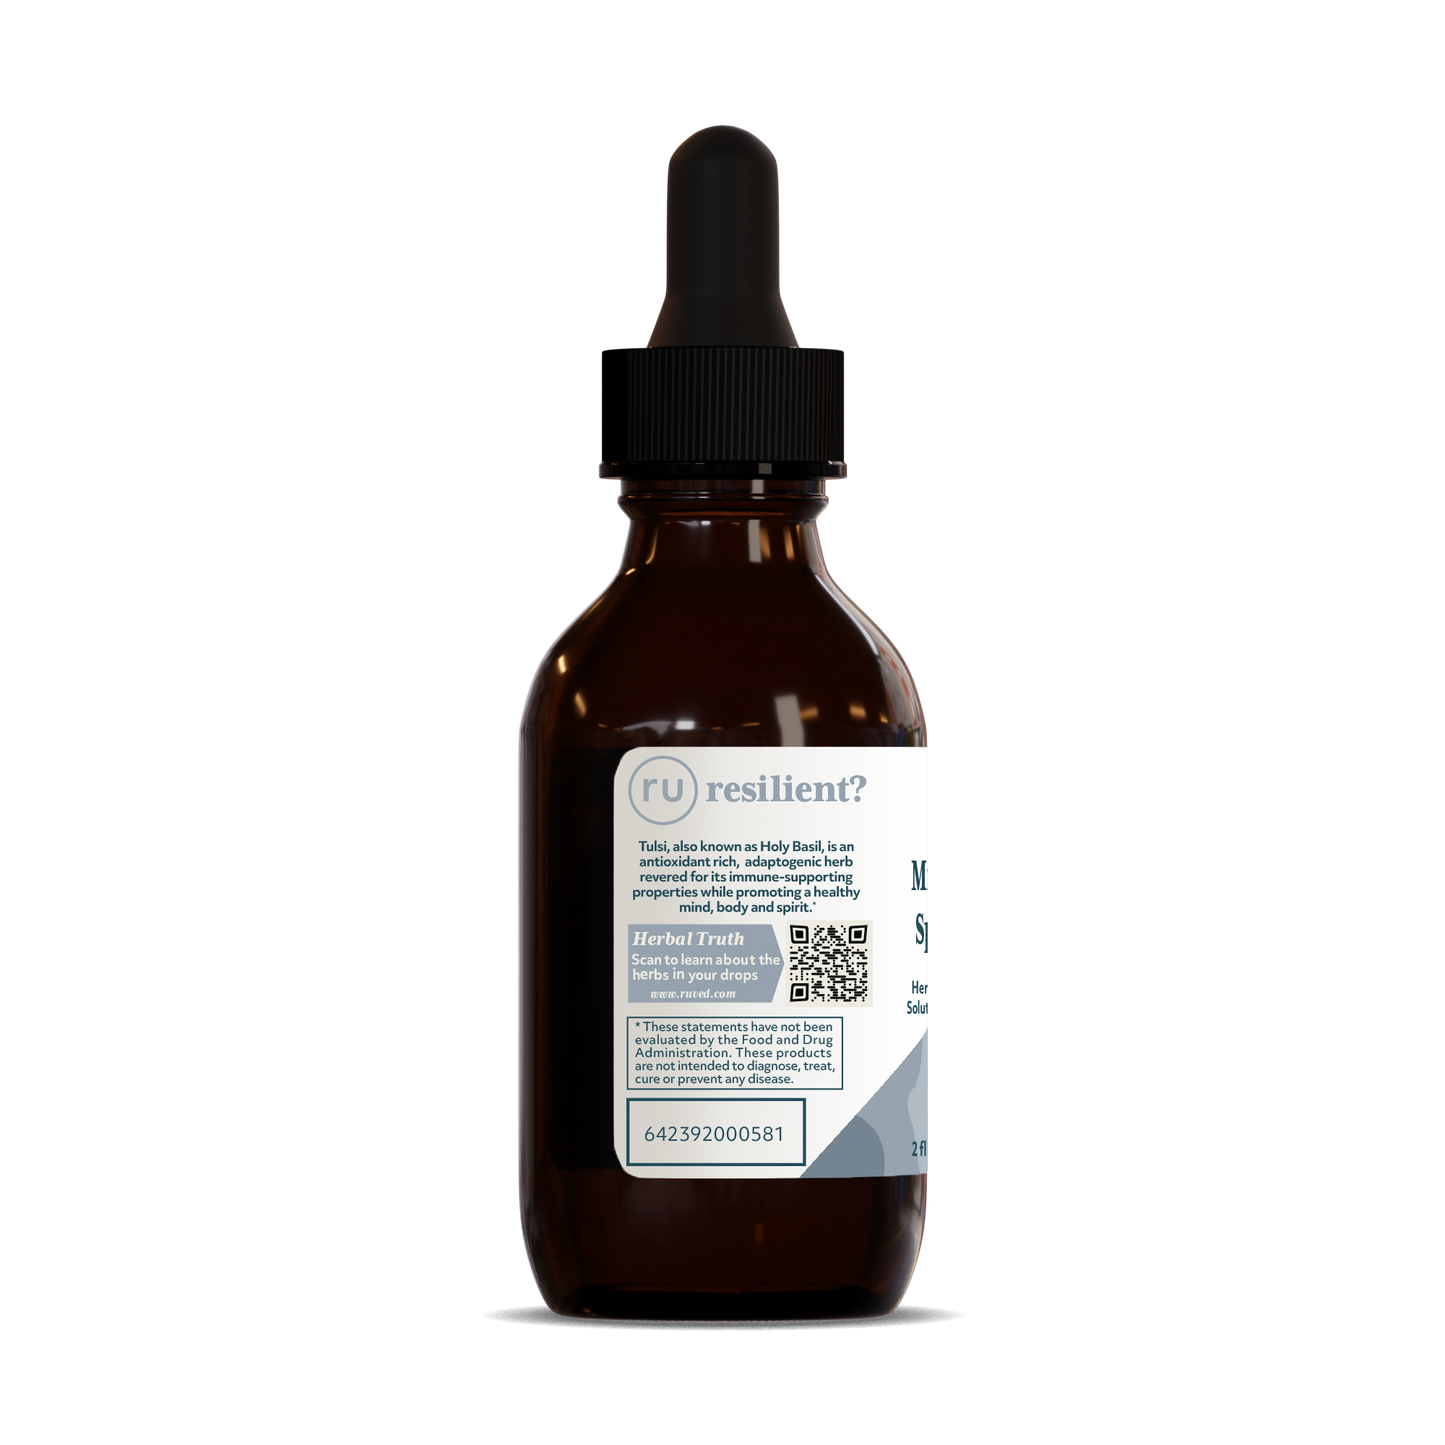 Tulsi drops Description Side - Organic Holy Basil Extract Tincture, 60ml bottle, herbal remedy for stress relief and immune support.